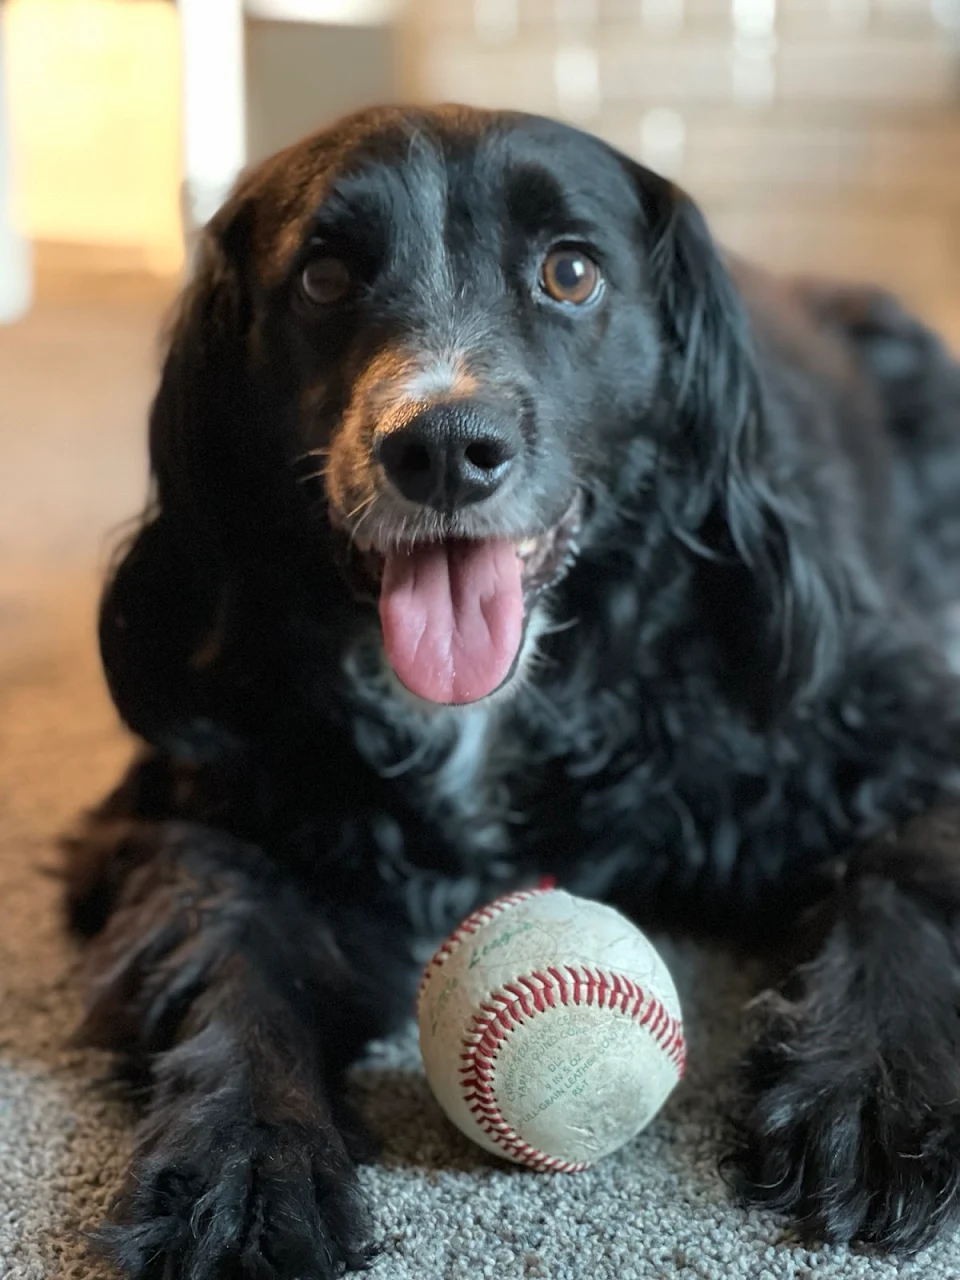 Just a Pup with his ball